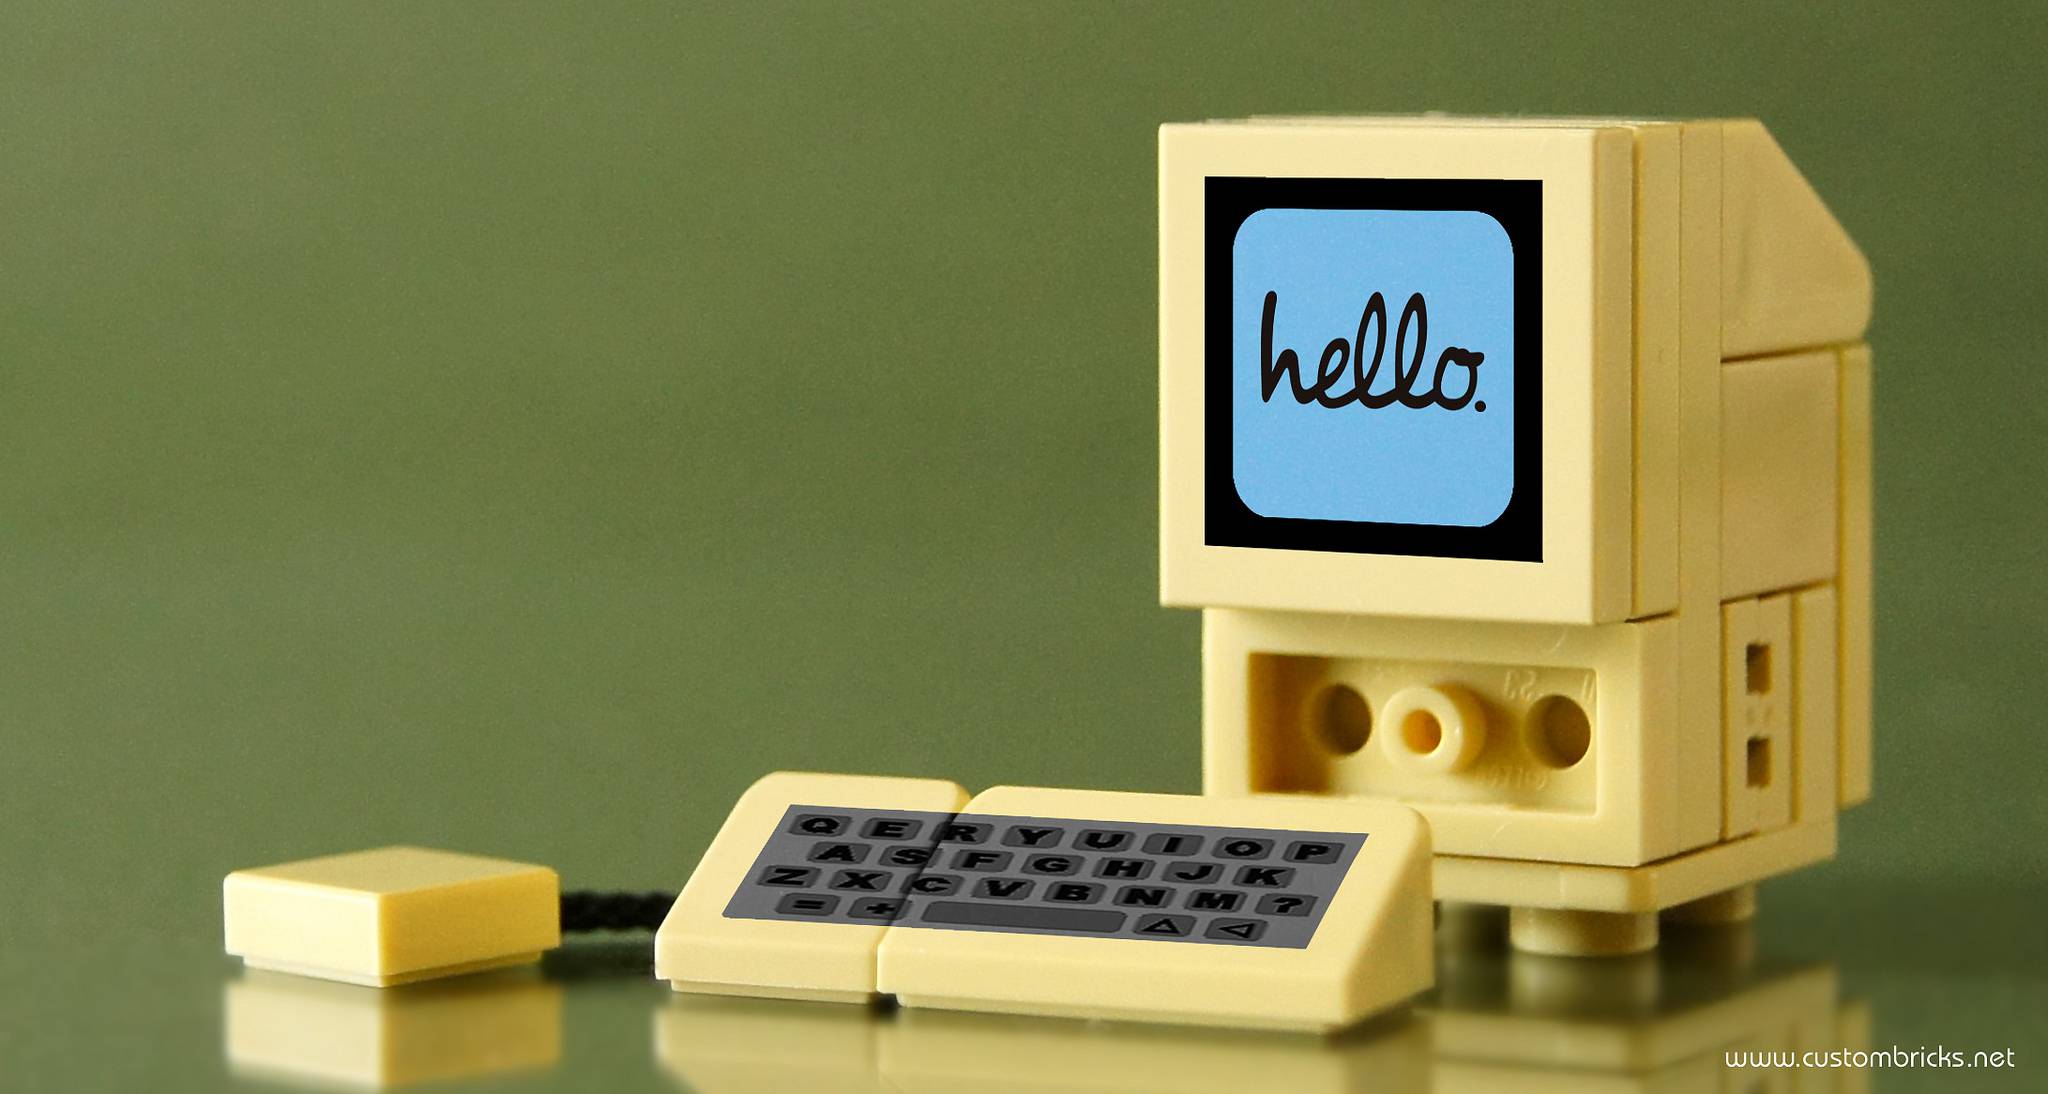 Apple 2 computer made out of lego bricks